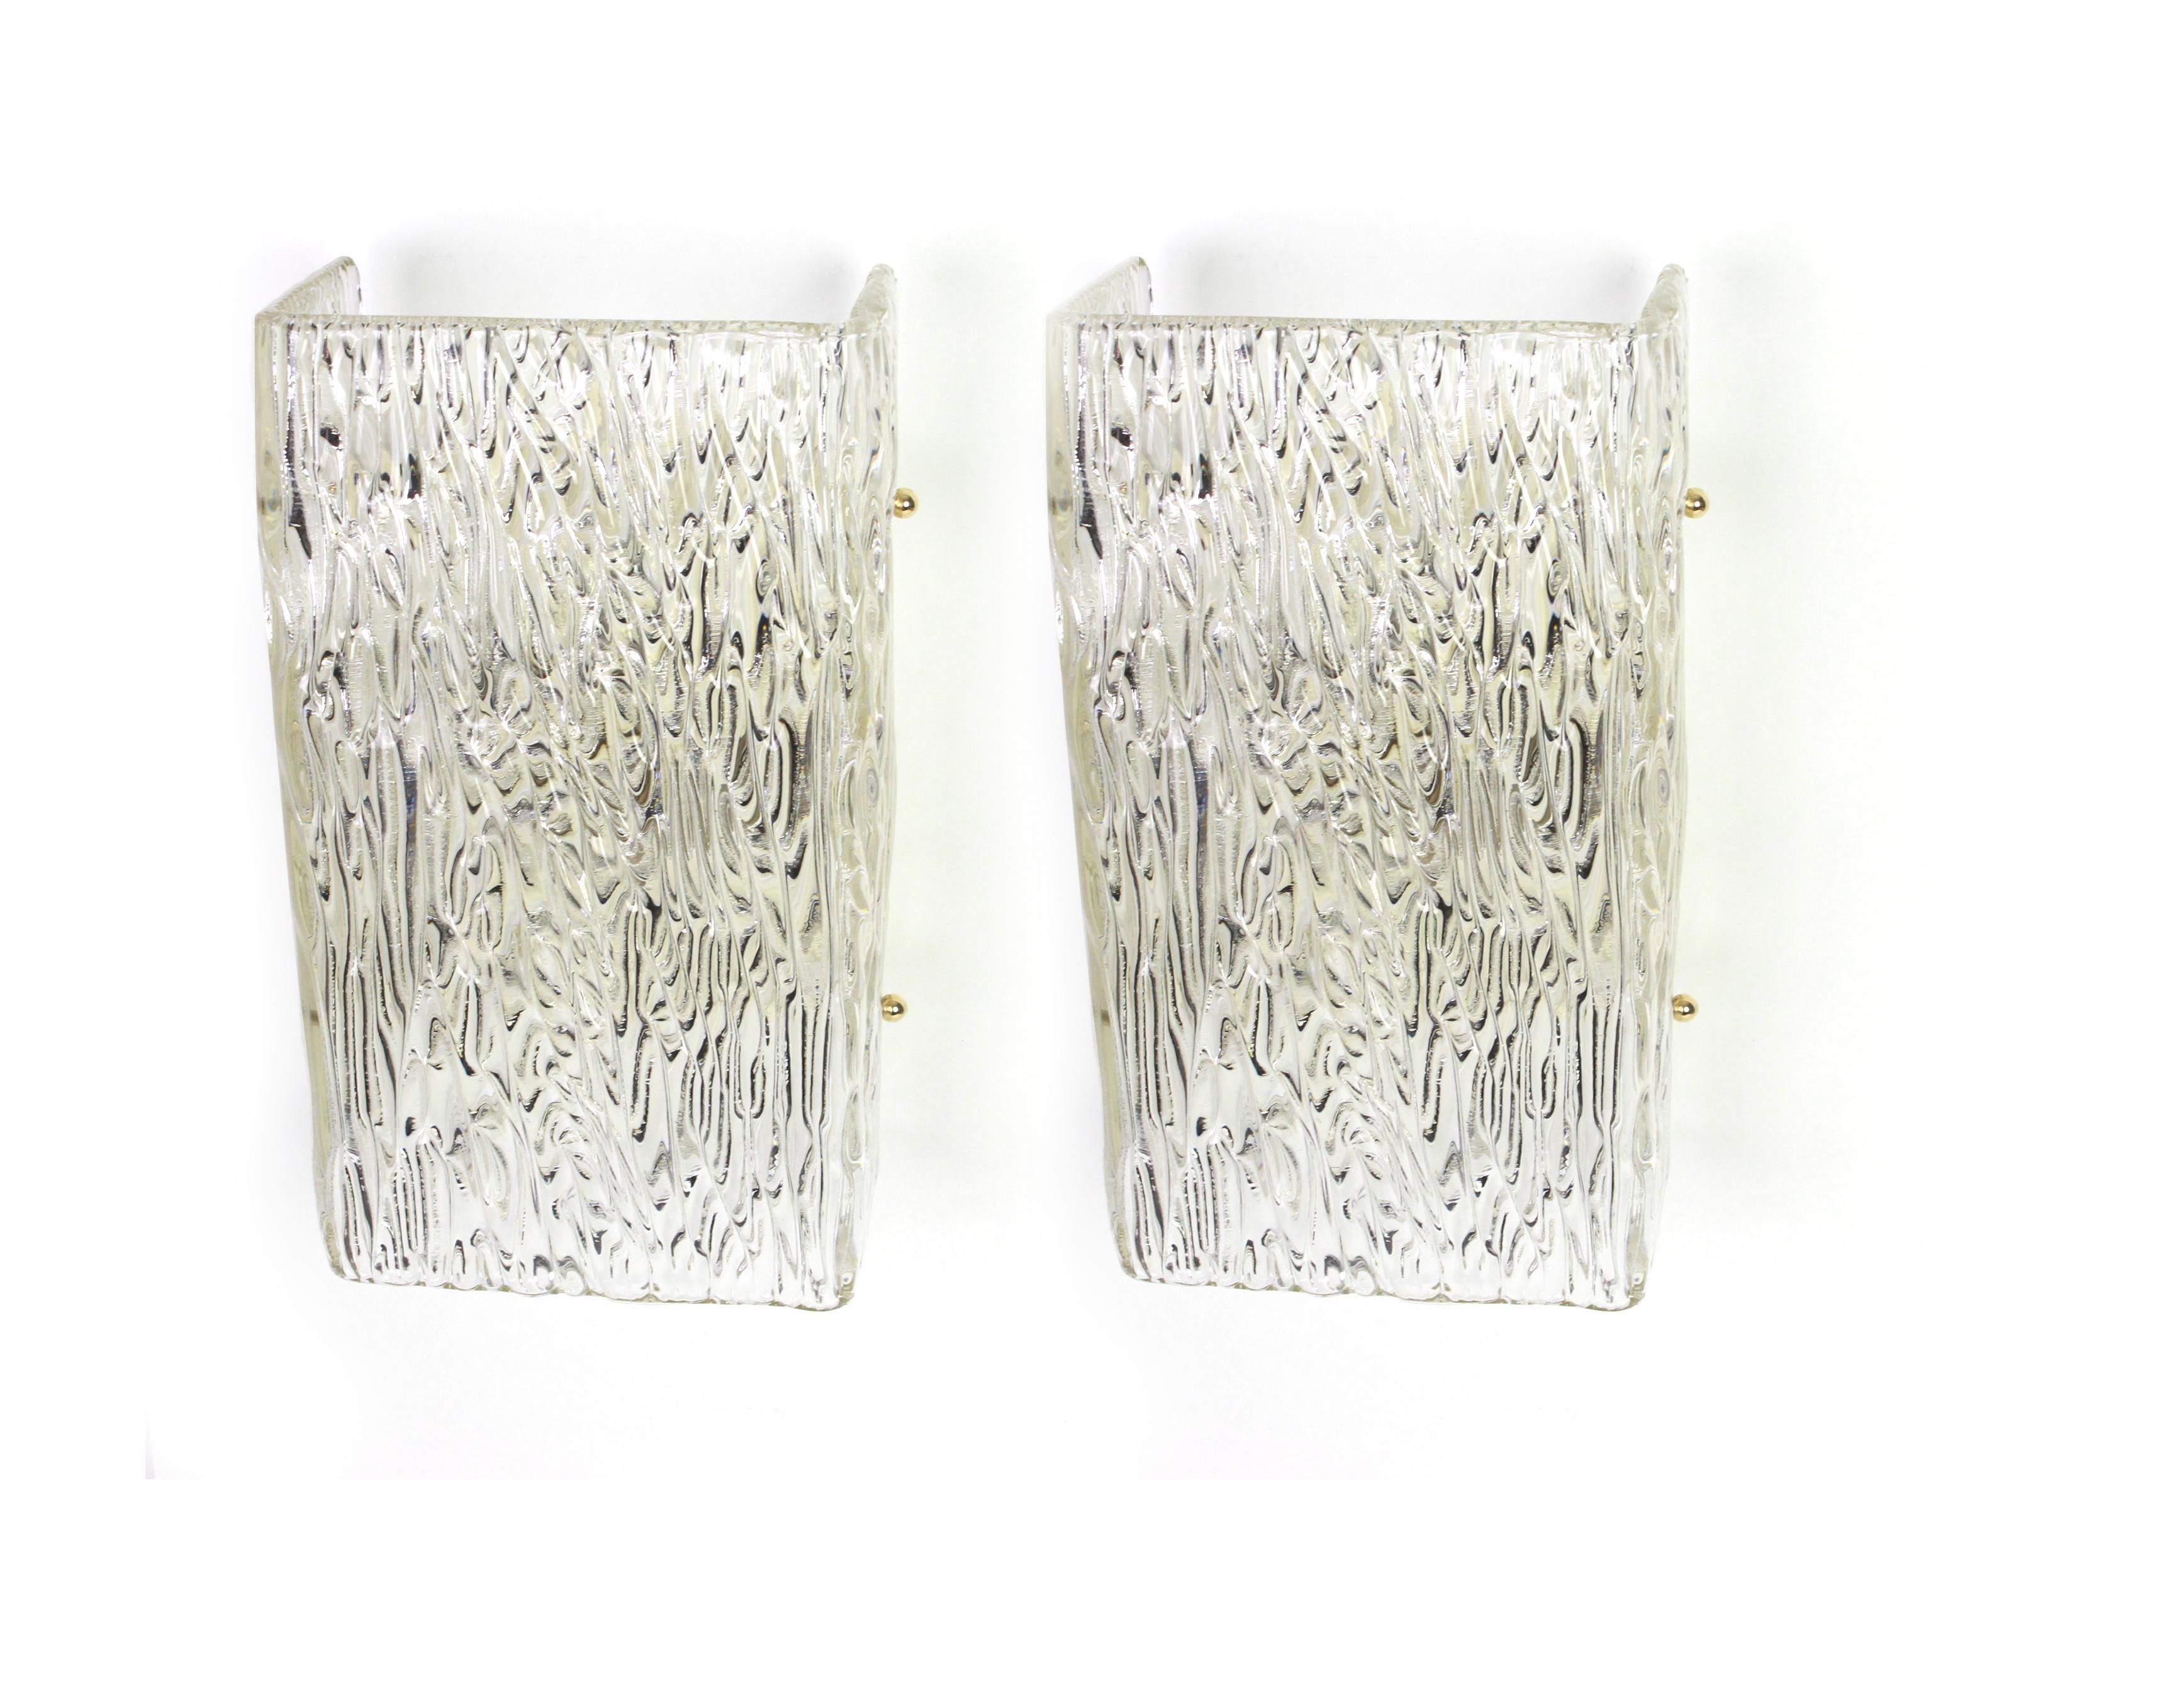 Wonderful pair of midcentury wall sconces with large Murano glass piece on a frame in each wall lamp, made by Kalmar, Austria, manufactured, circa 1960-1969.
Each sconce needs two x E27 standard bulbs and they are also compatible with the US